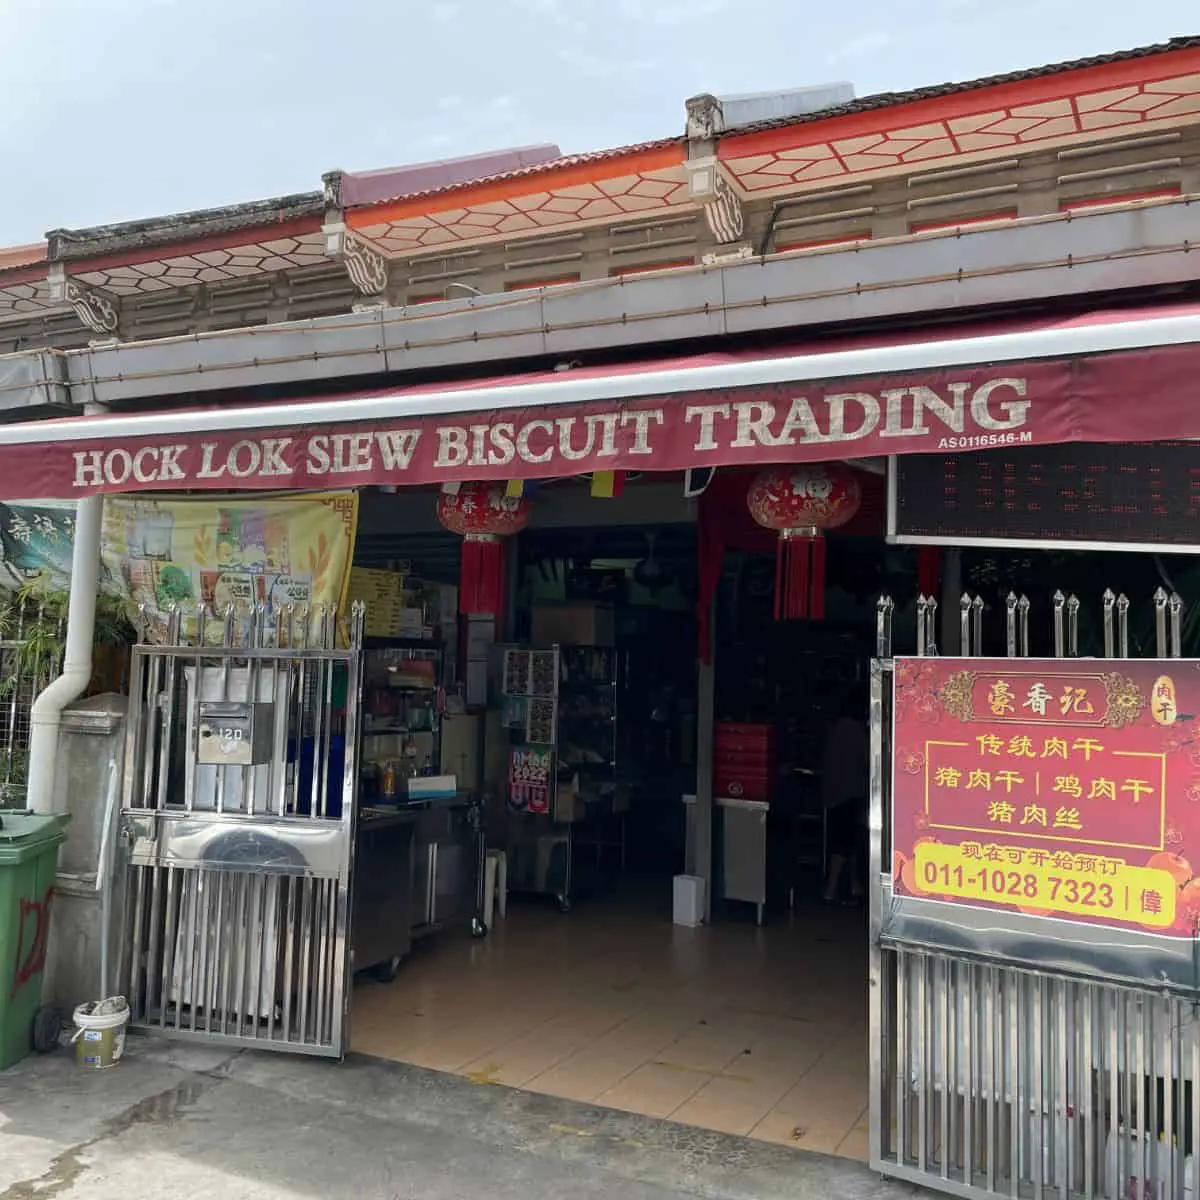 Hock Lok Siew biscuit trading store front Penang